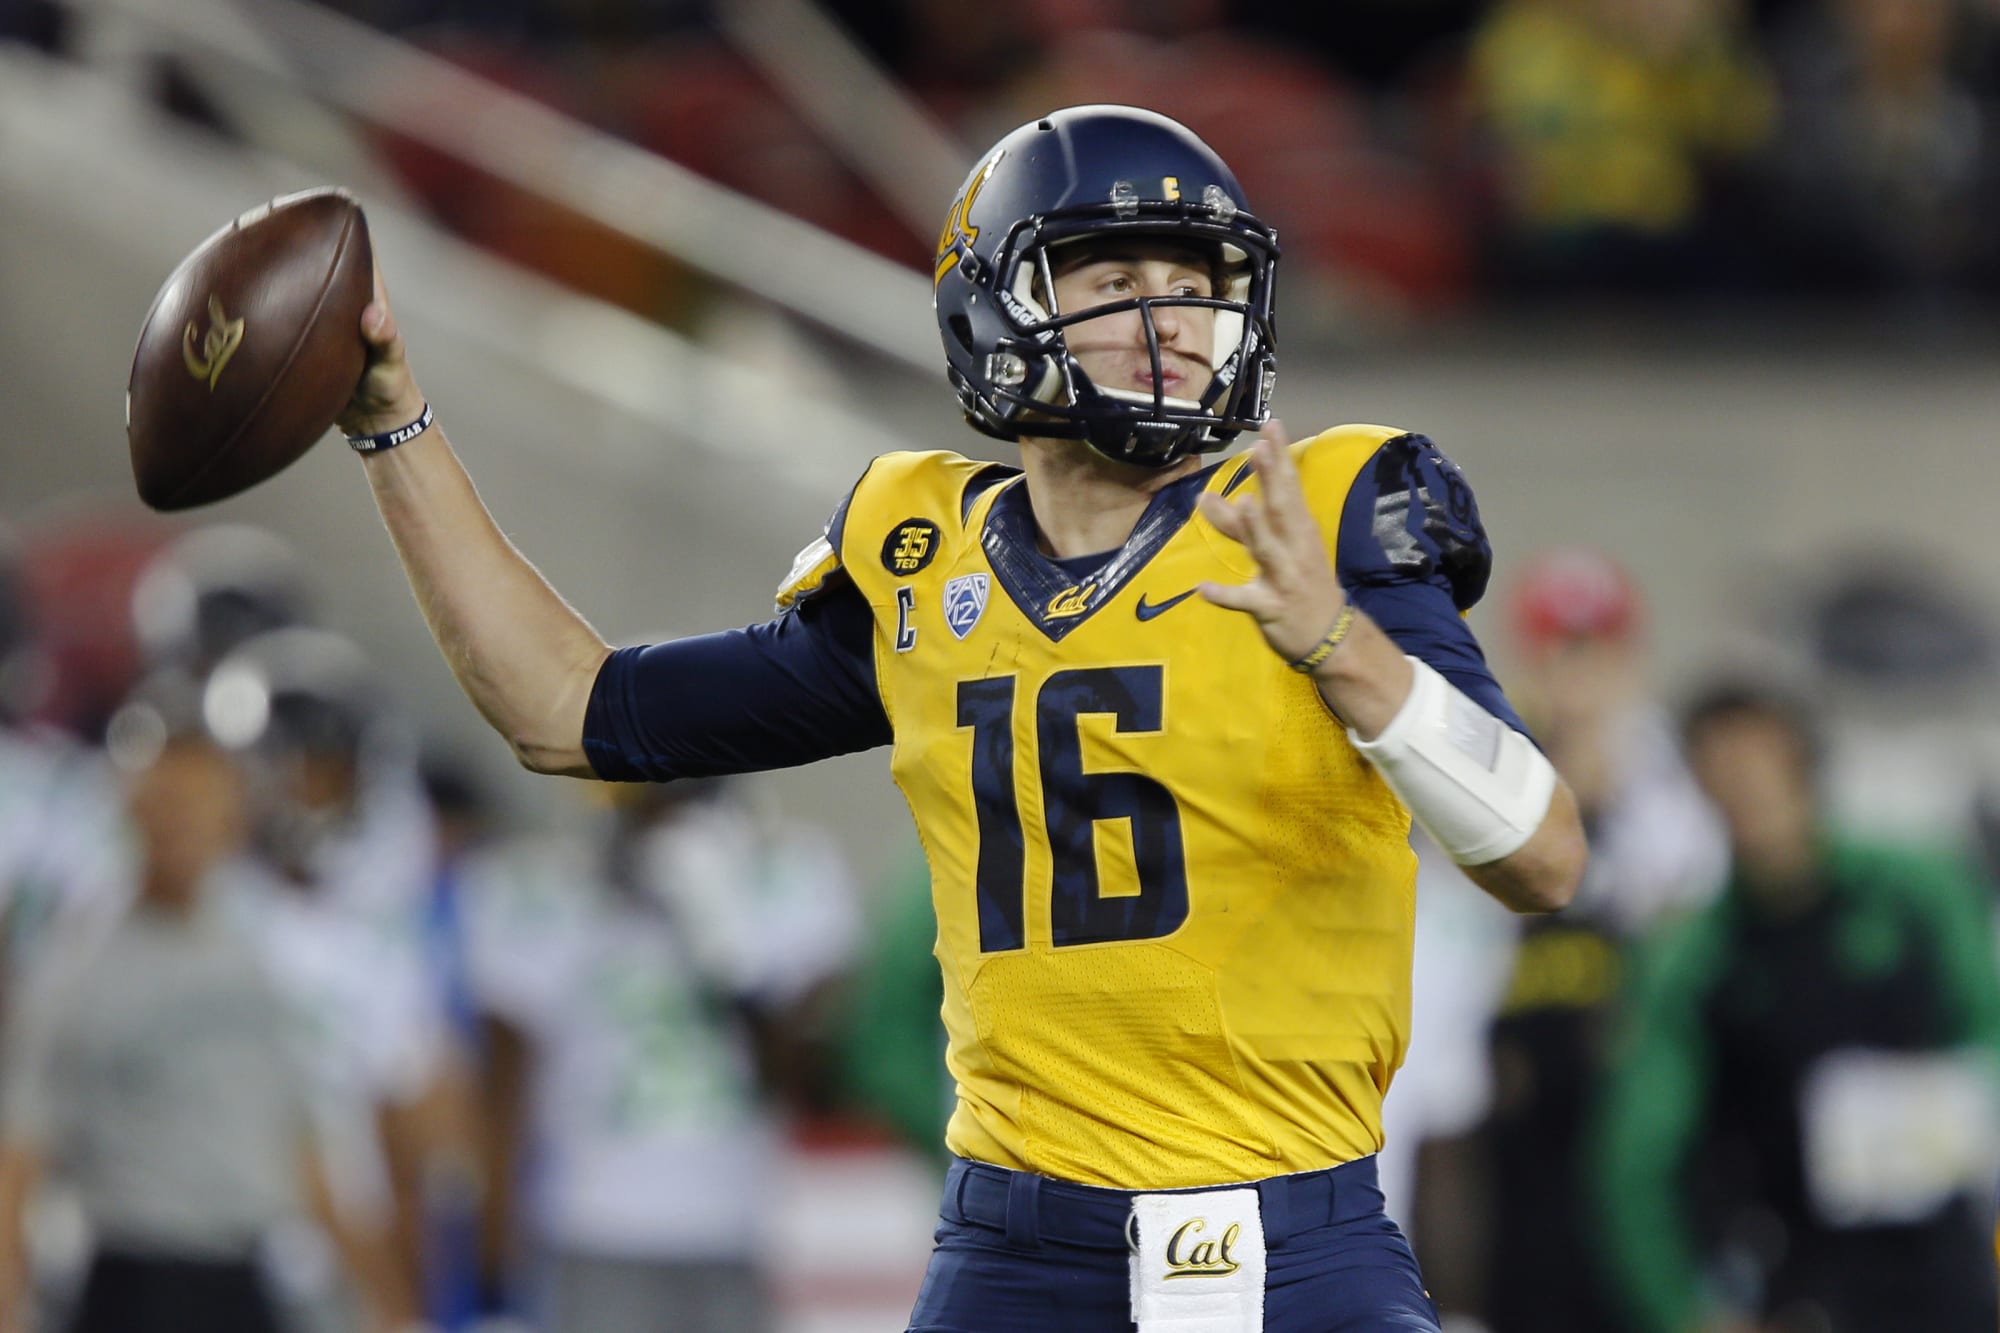 Cal football: 15 greatest quarterbacks in Golden Bears history - Page 10